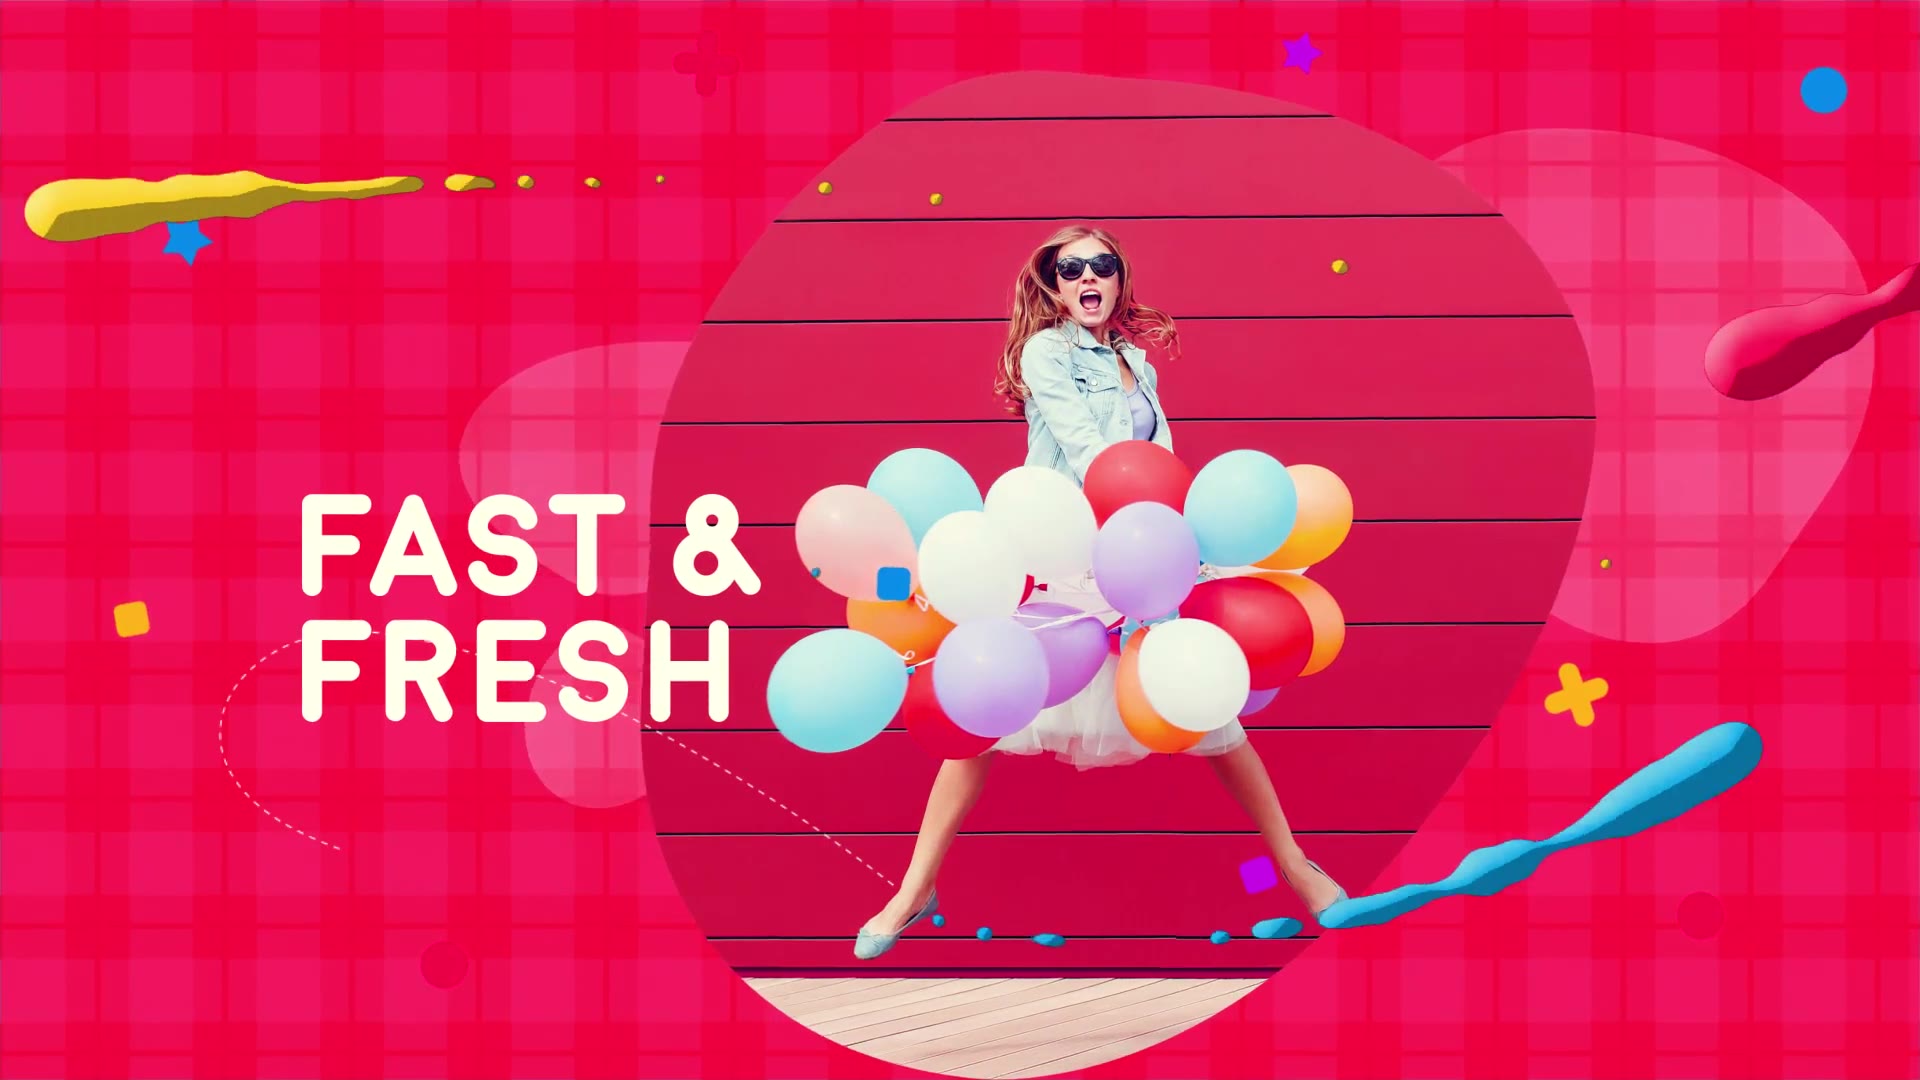 Colorful Opener - Download Videohive 20526674